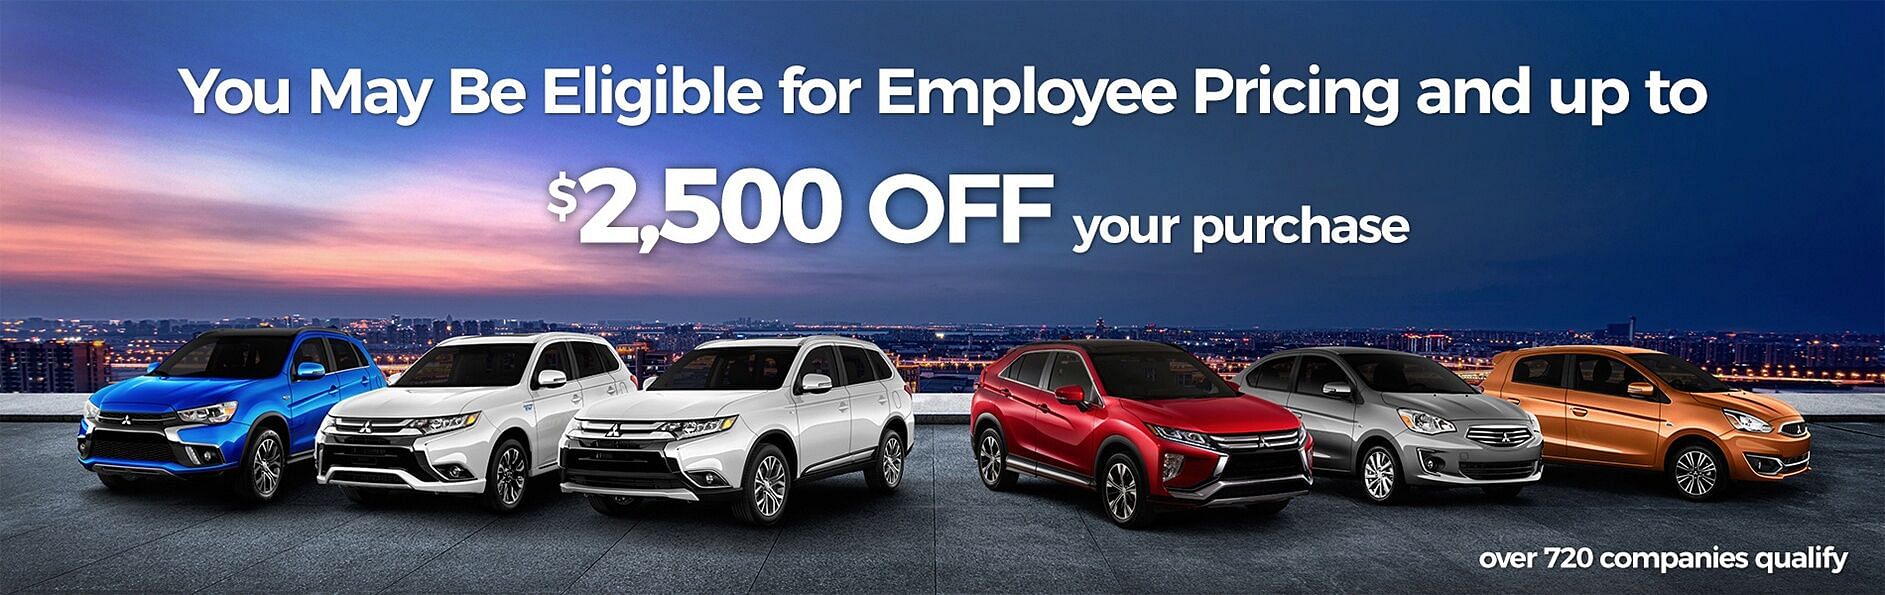 Employee Pricing banner